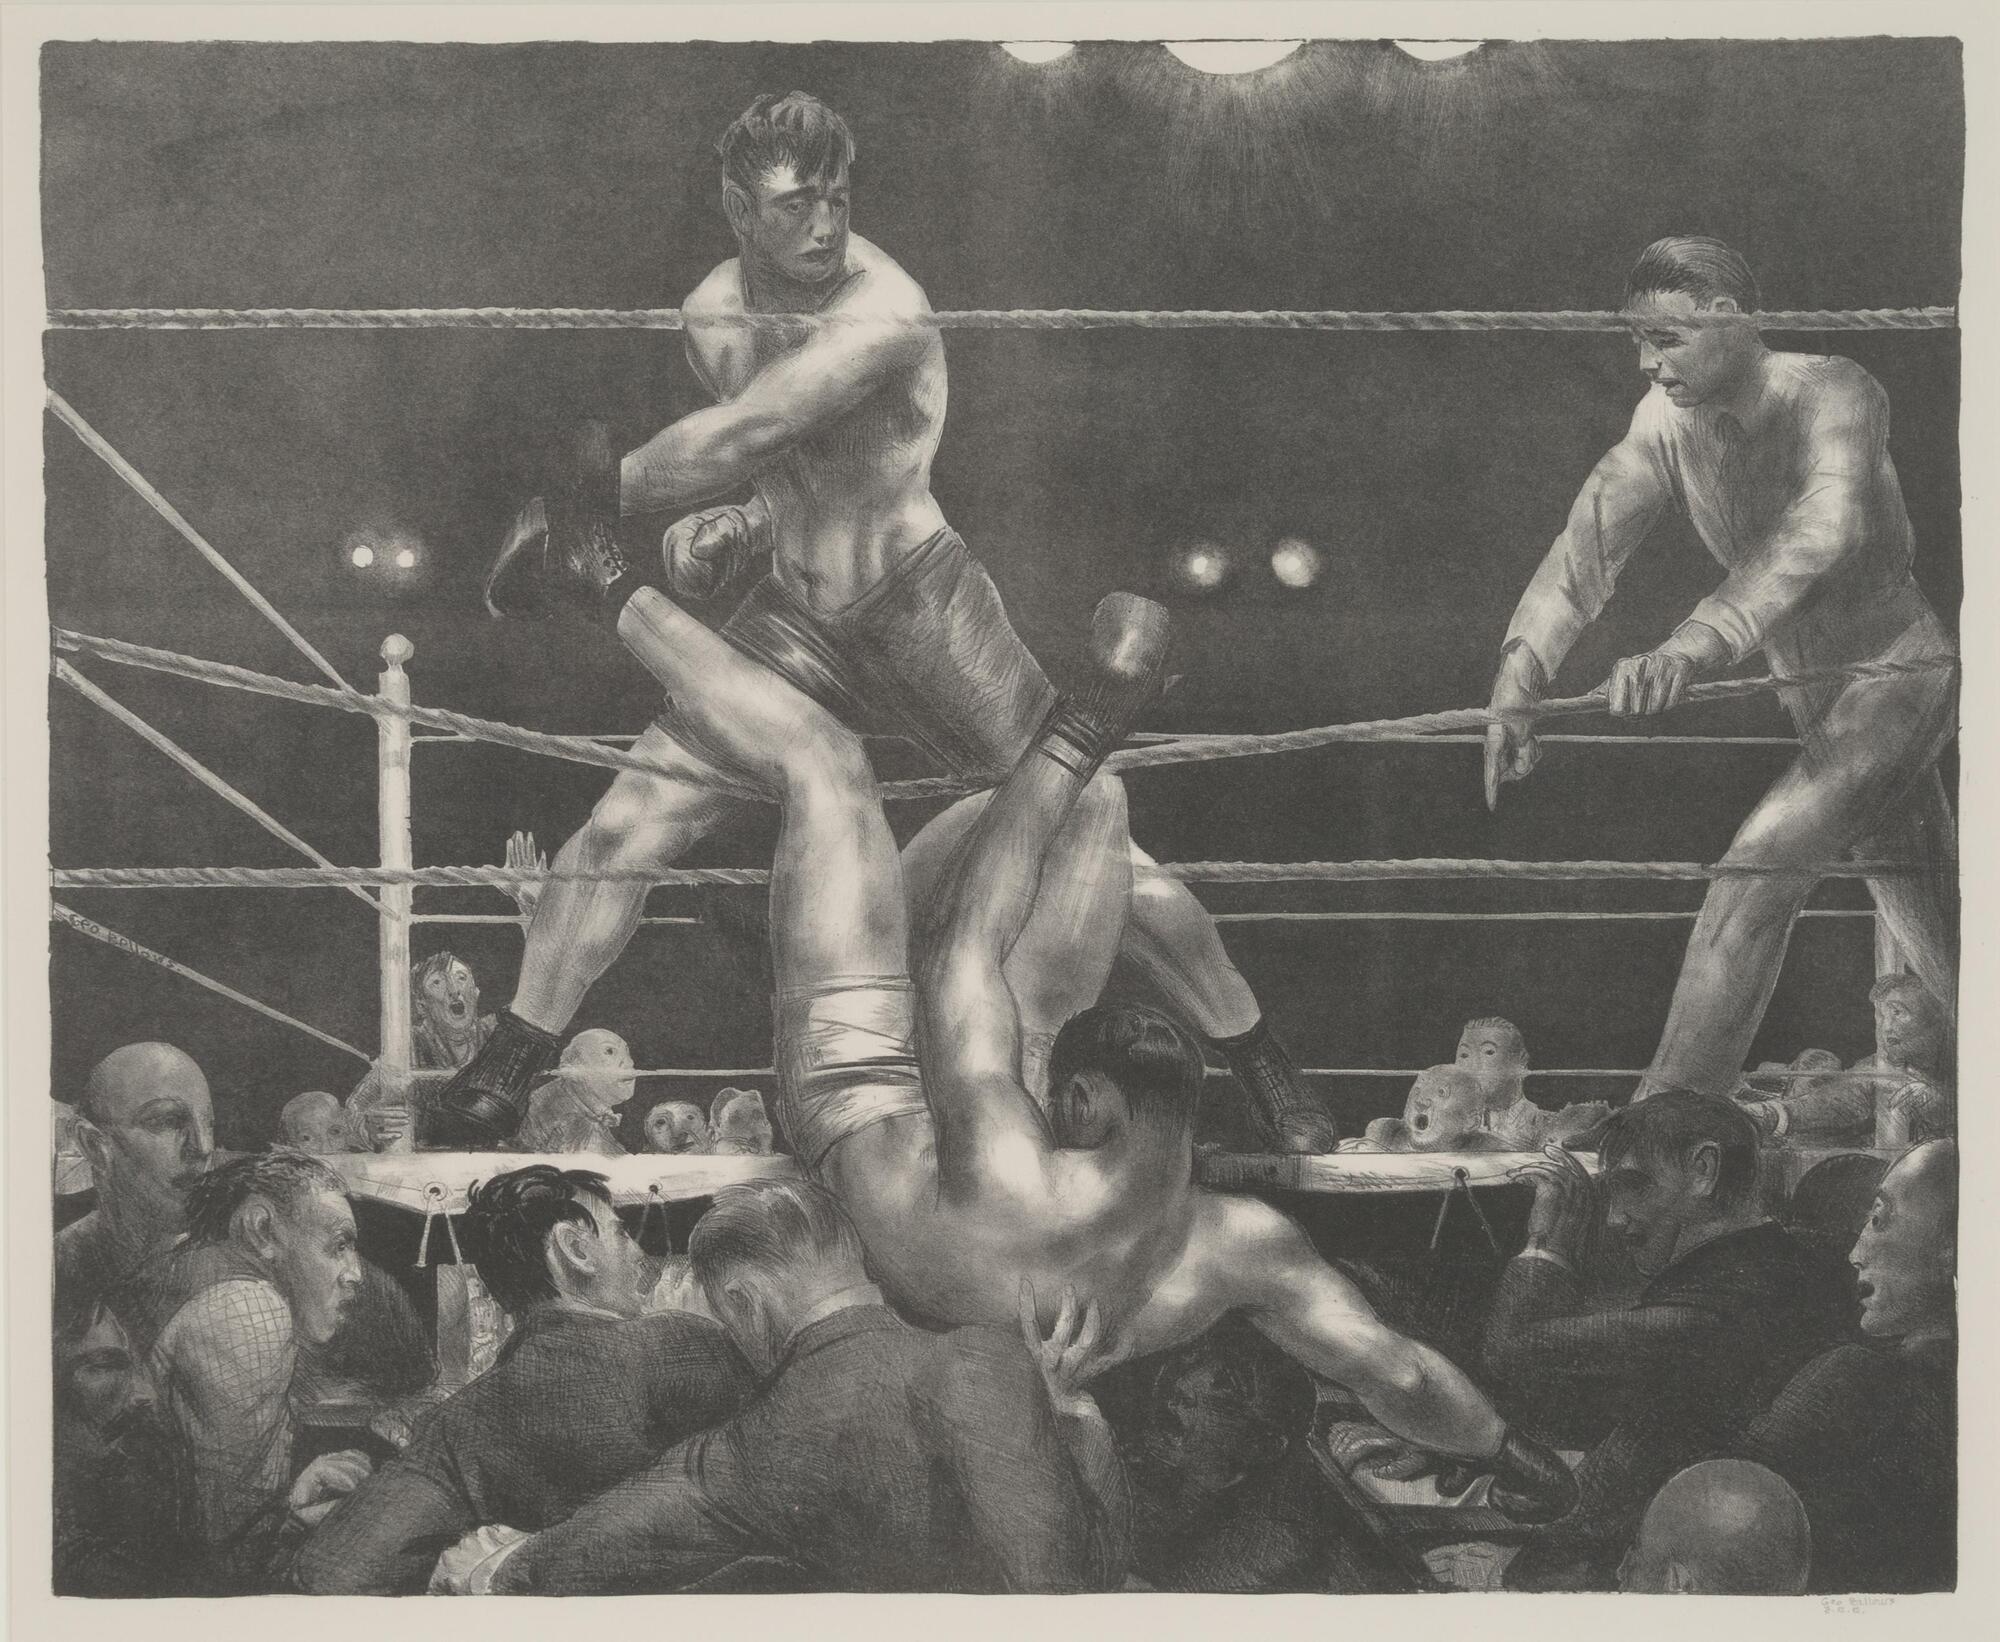 Boxer in a ring after a punch that sends the opponent out of the ring into the audience. The referree is on the right hand side, people are cheering.